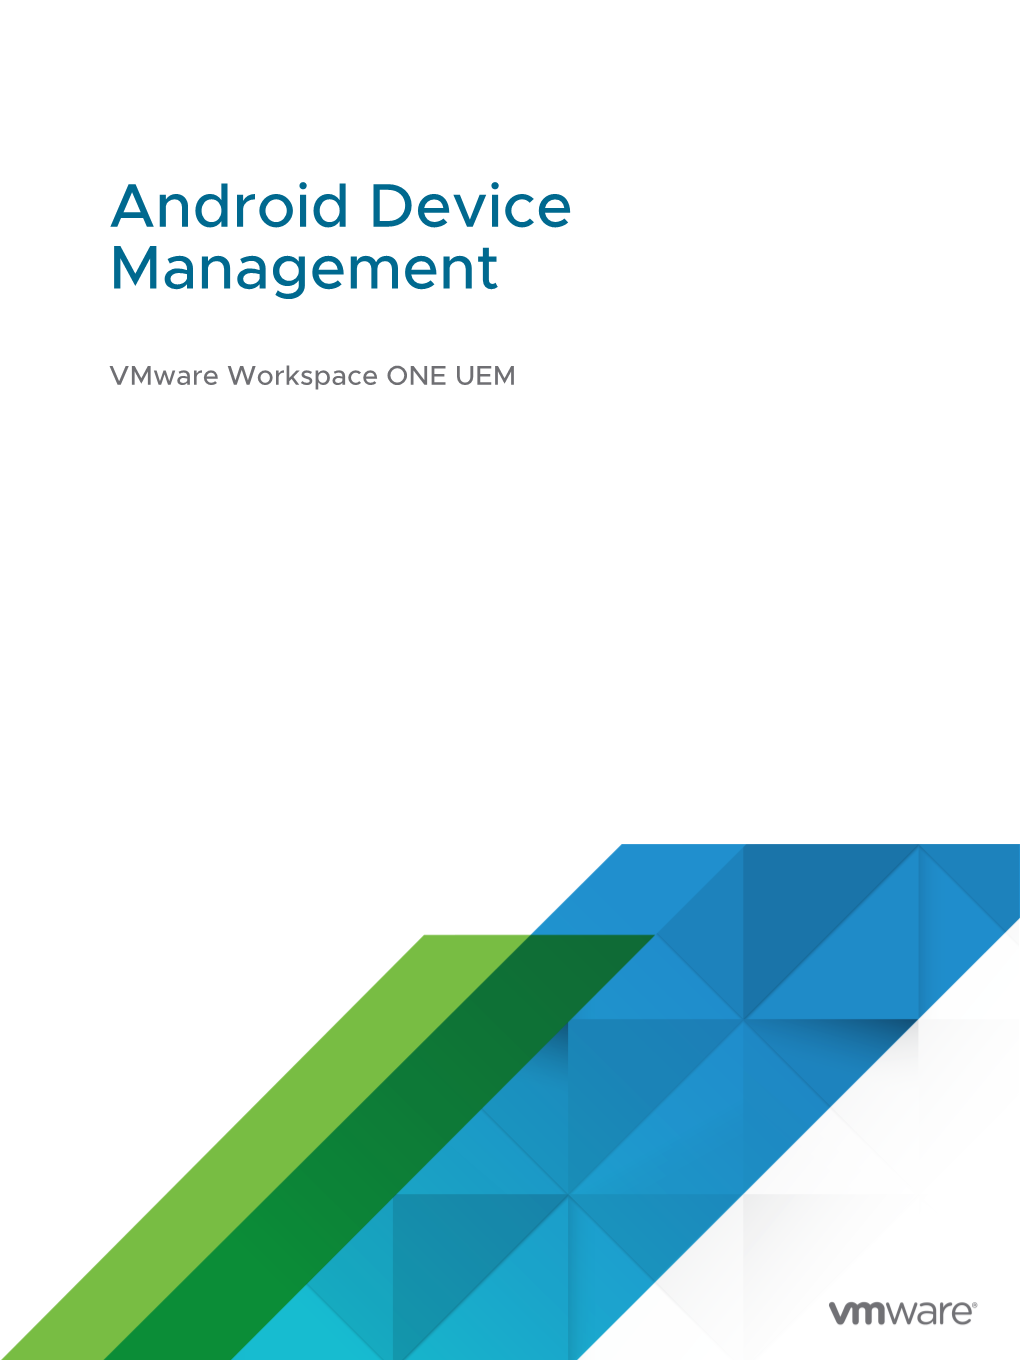 Vmware Workspace ONE UEM Android Device Management